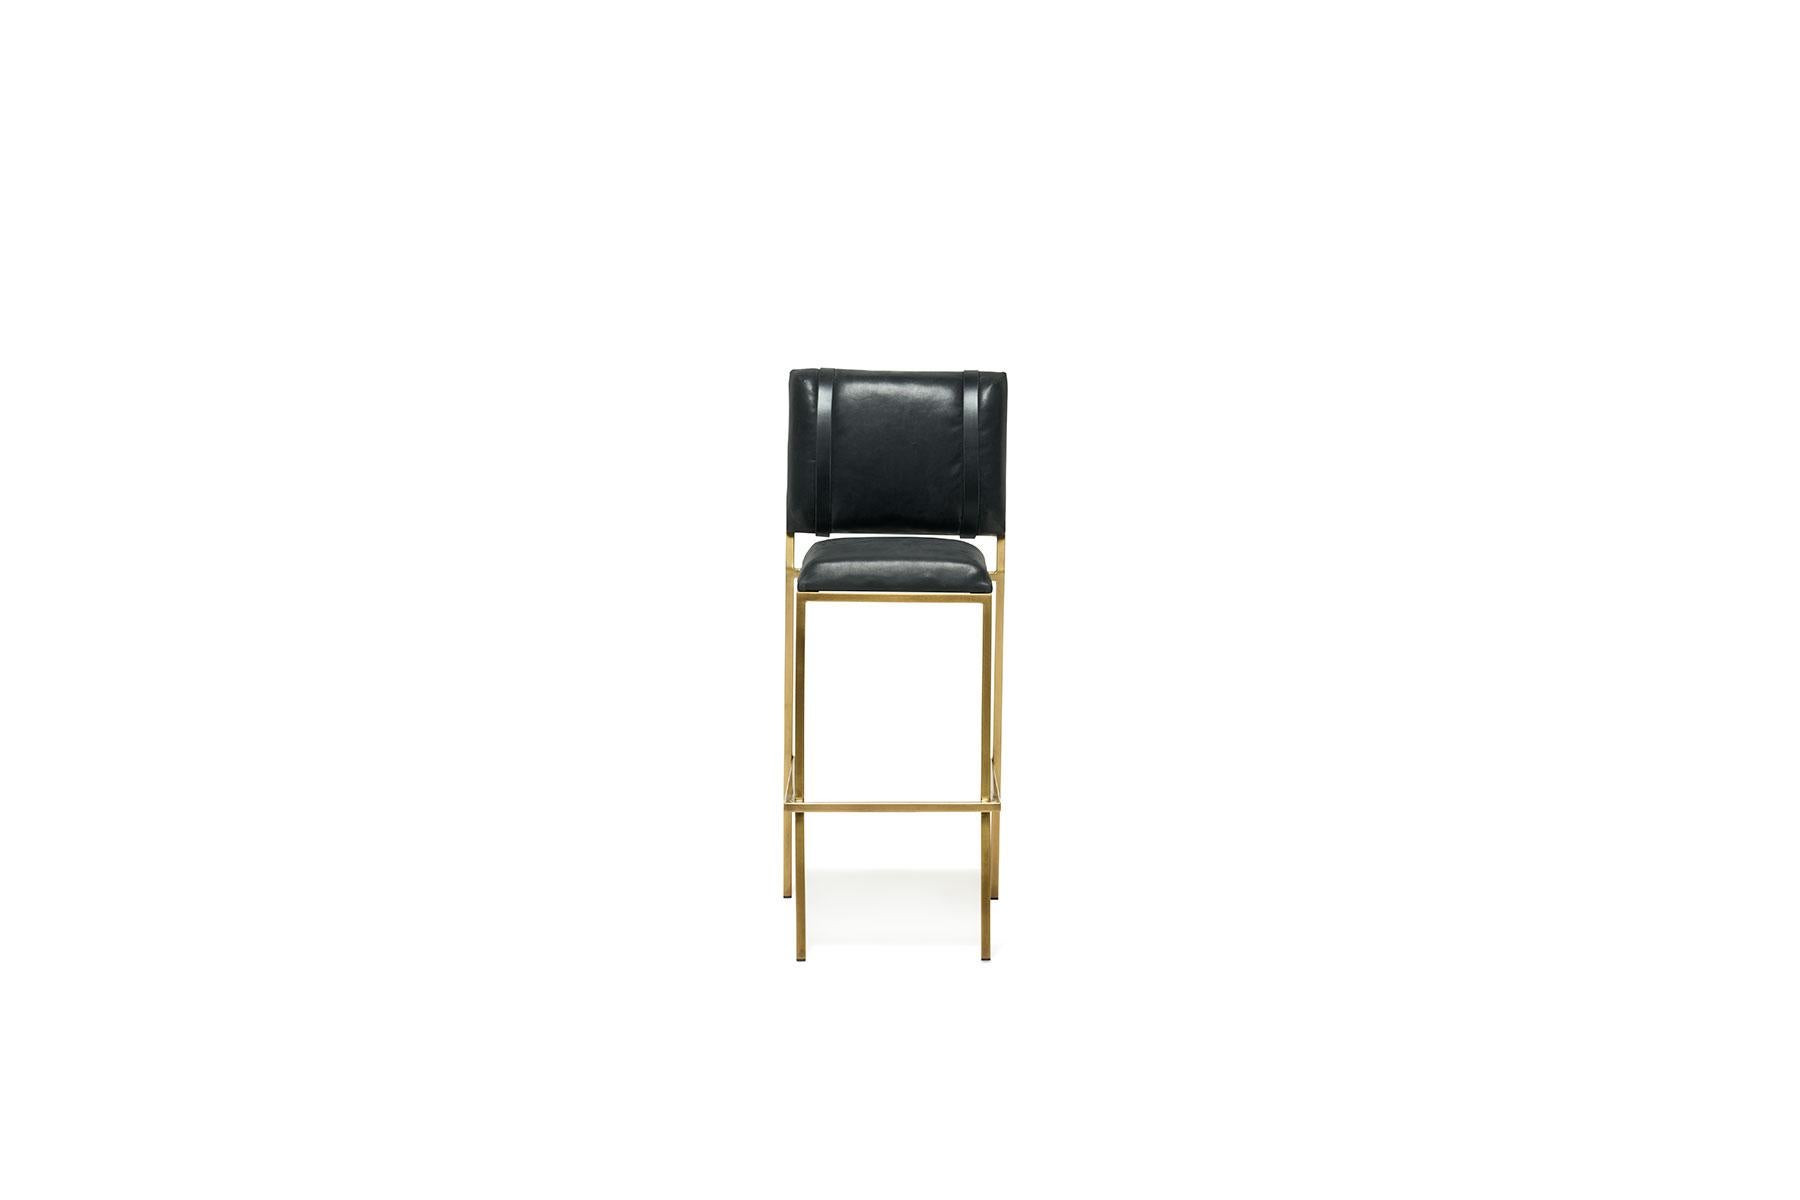 The Inheritance Barstool by Stephen Kenn is comfortable, stackable, and extensively customizable. It has been designed to withstand the rigors of a bar or restaurant environment, while still elegant enough to fit well in a residential home. 

Every